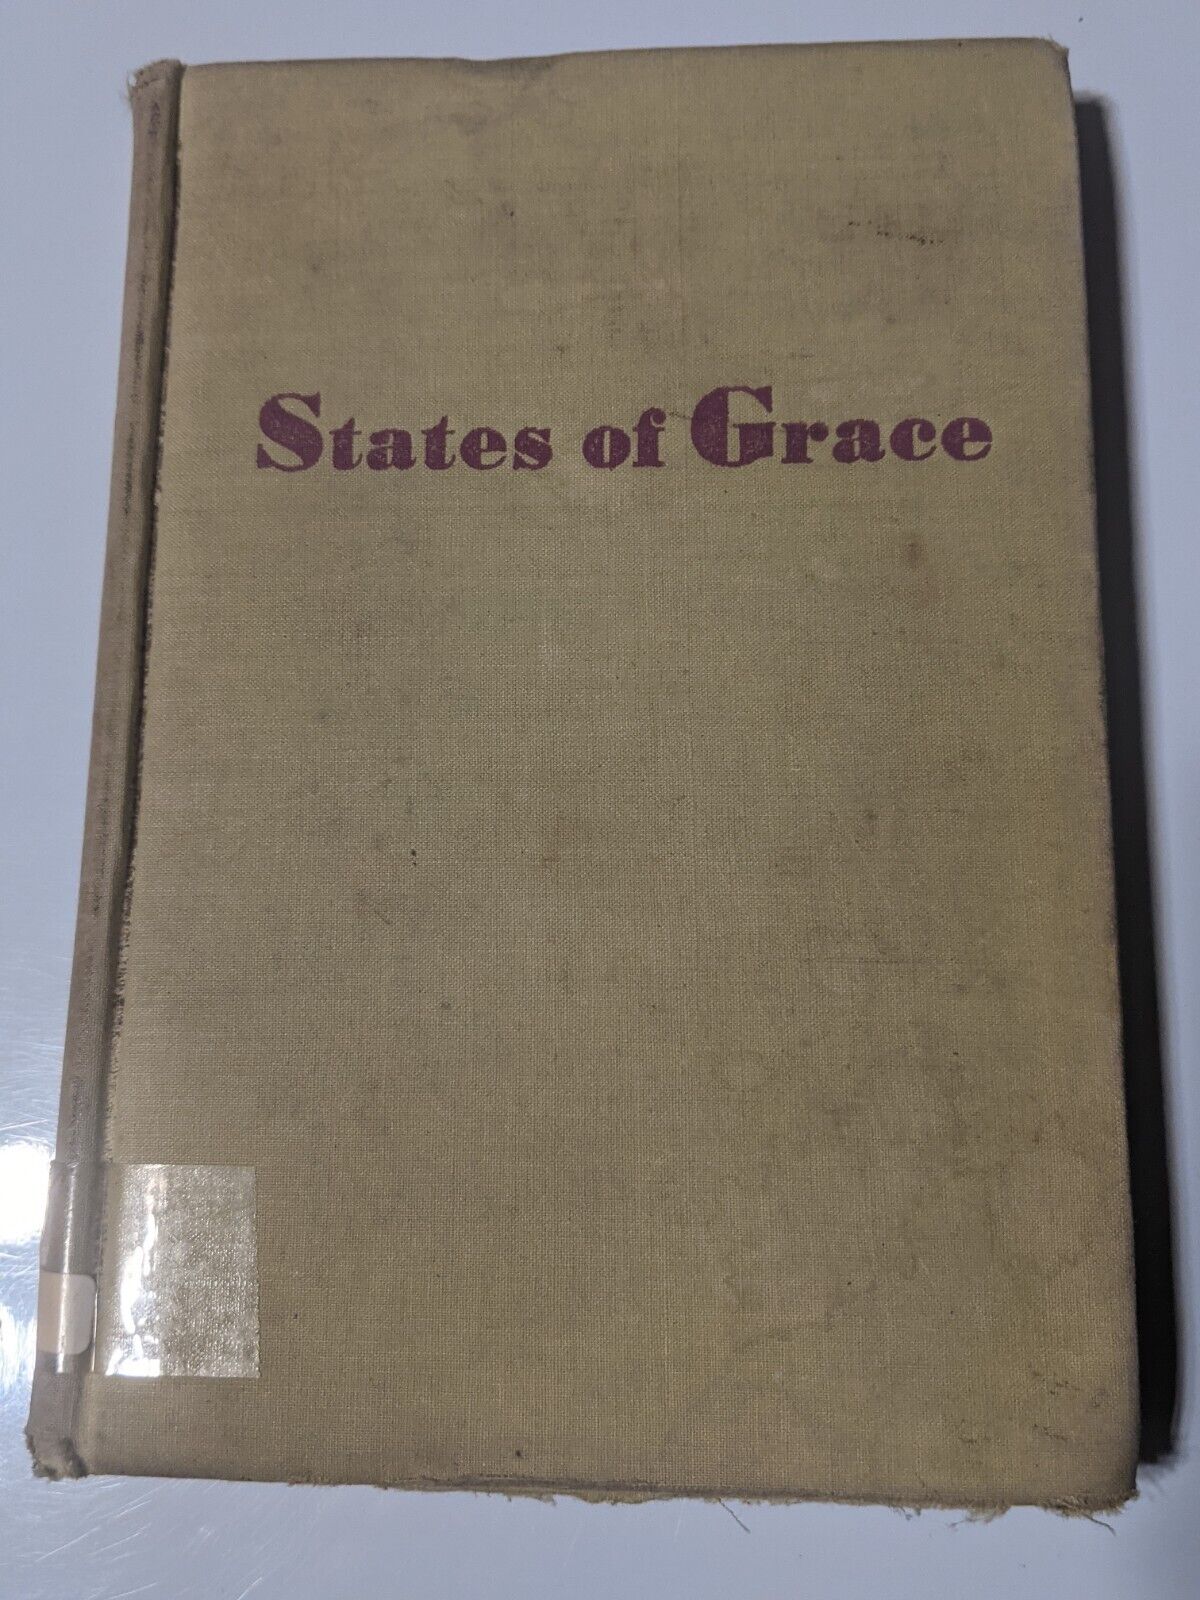 Vintage 1946 States of Grace by Francis Steegmuller Hardcover